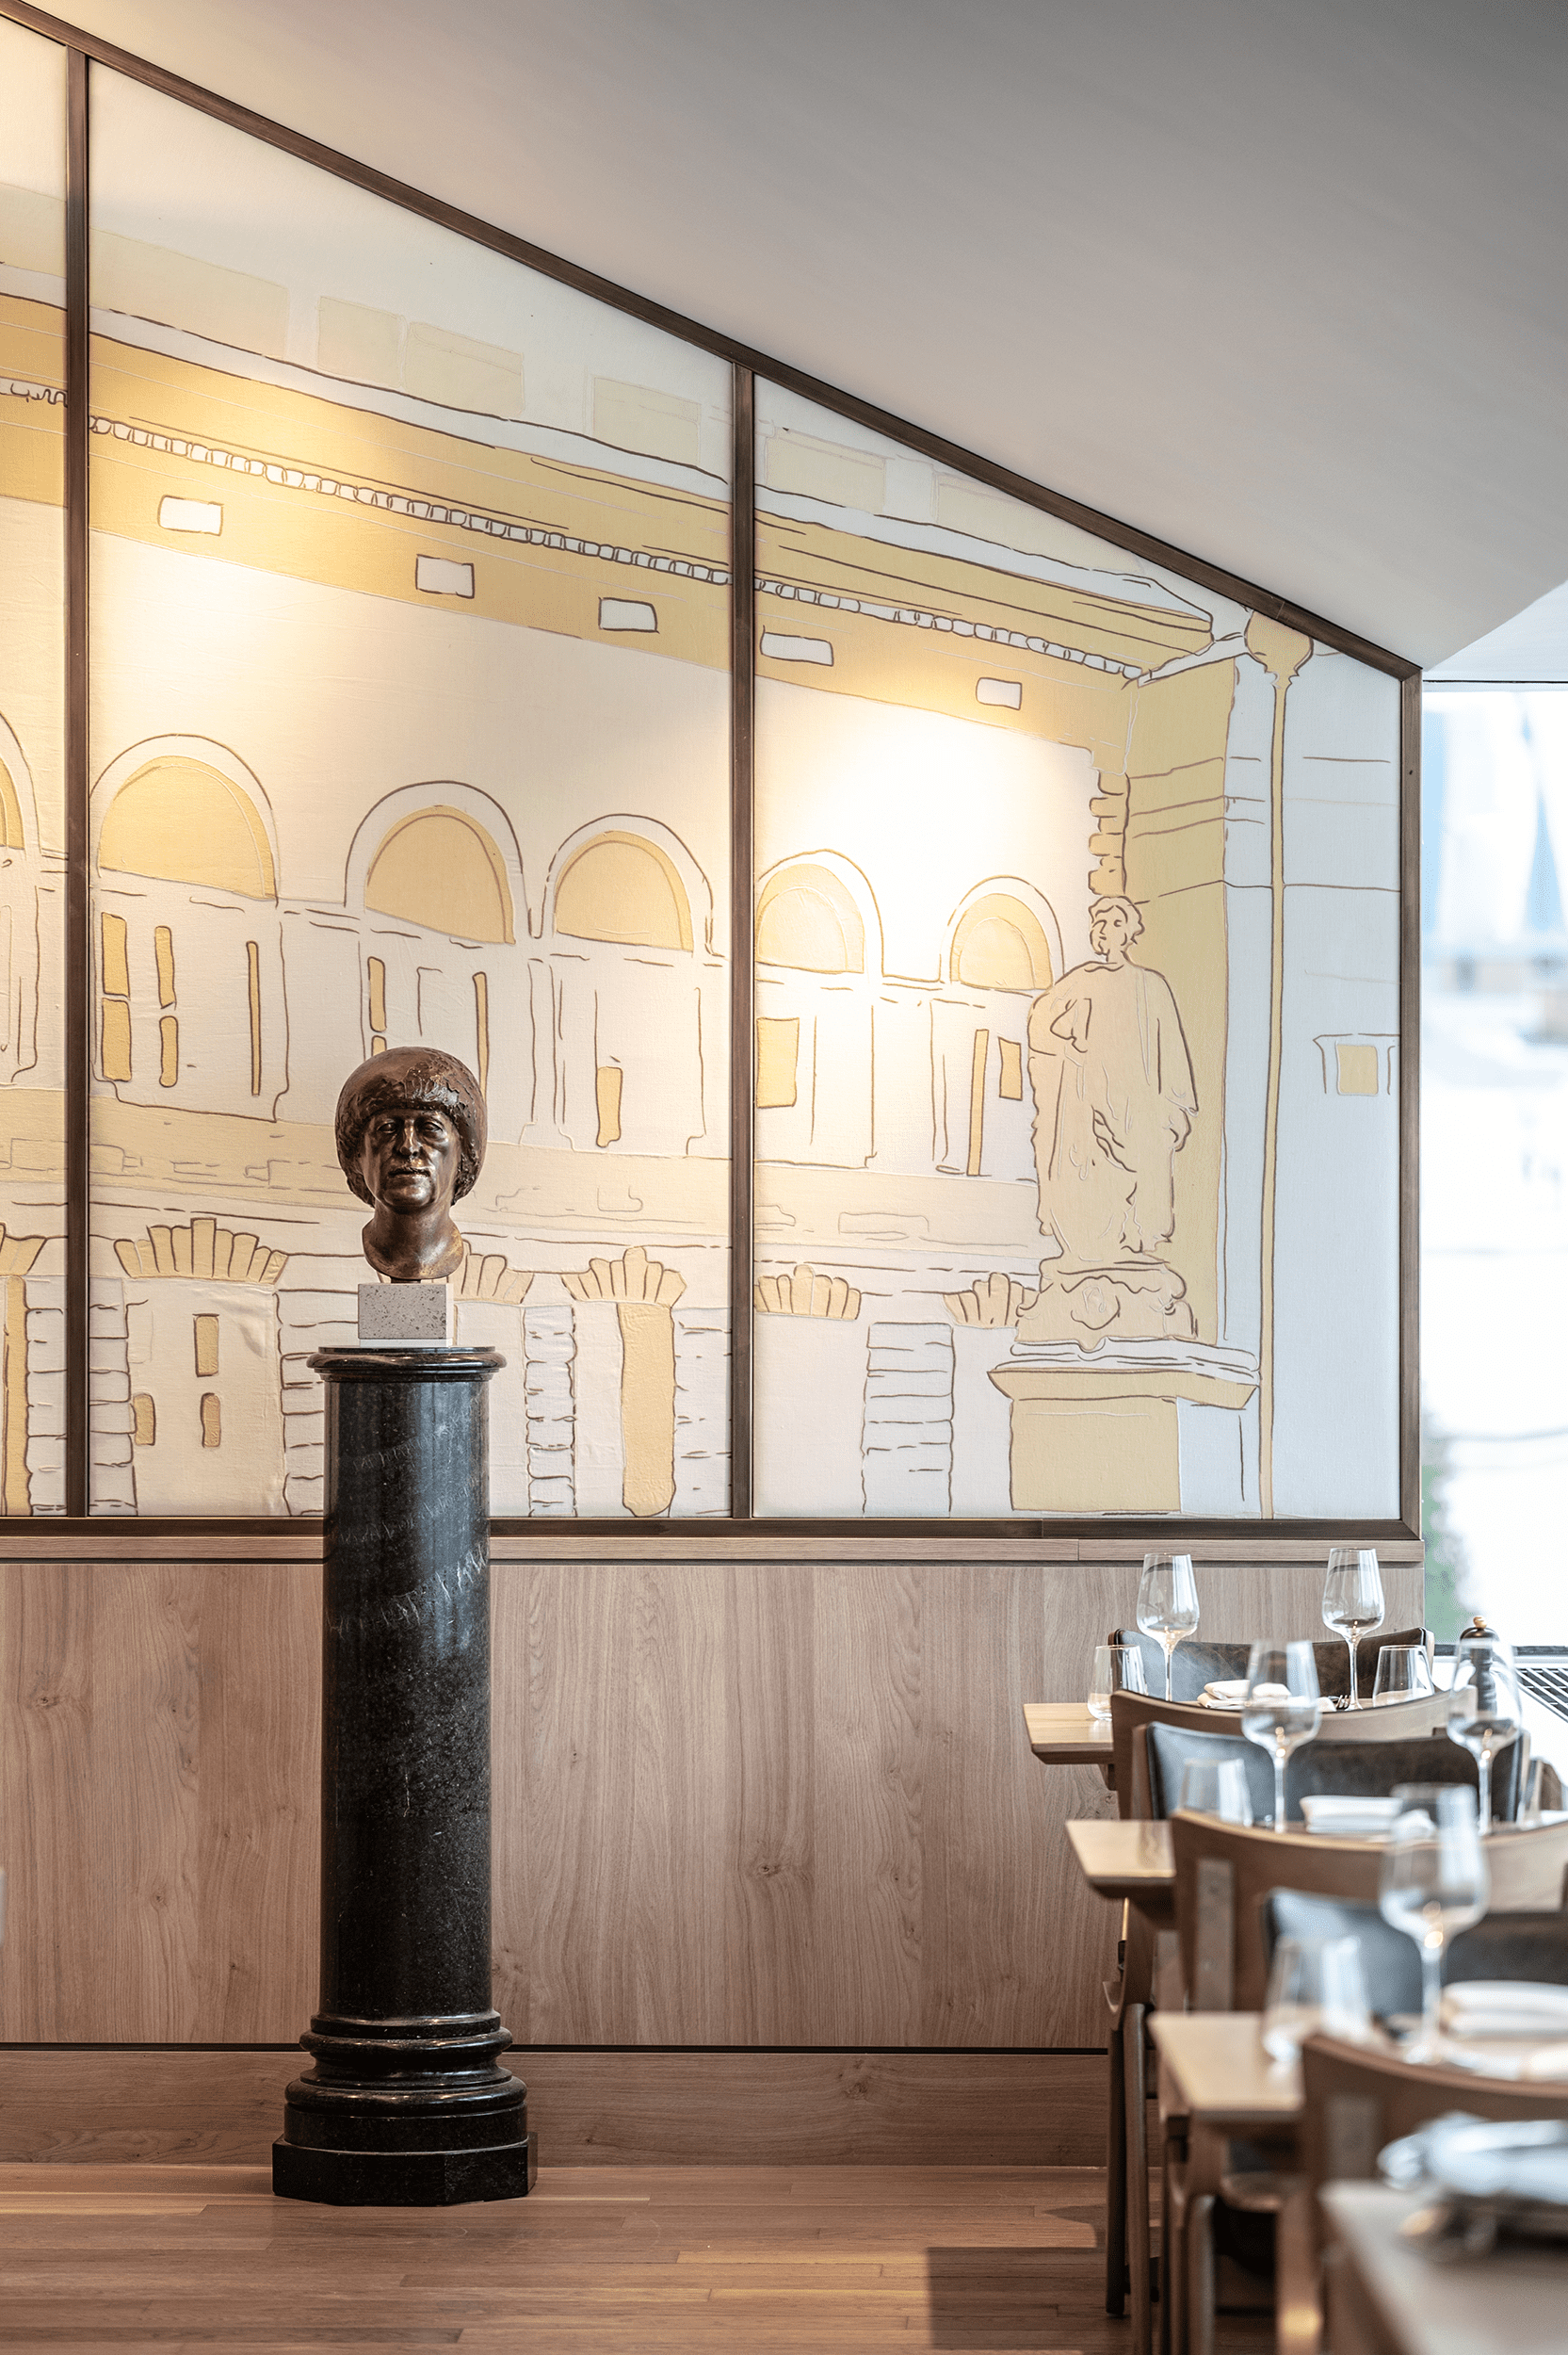 Bespoke wall covering and sculpture at The Portrait Restaurant